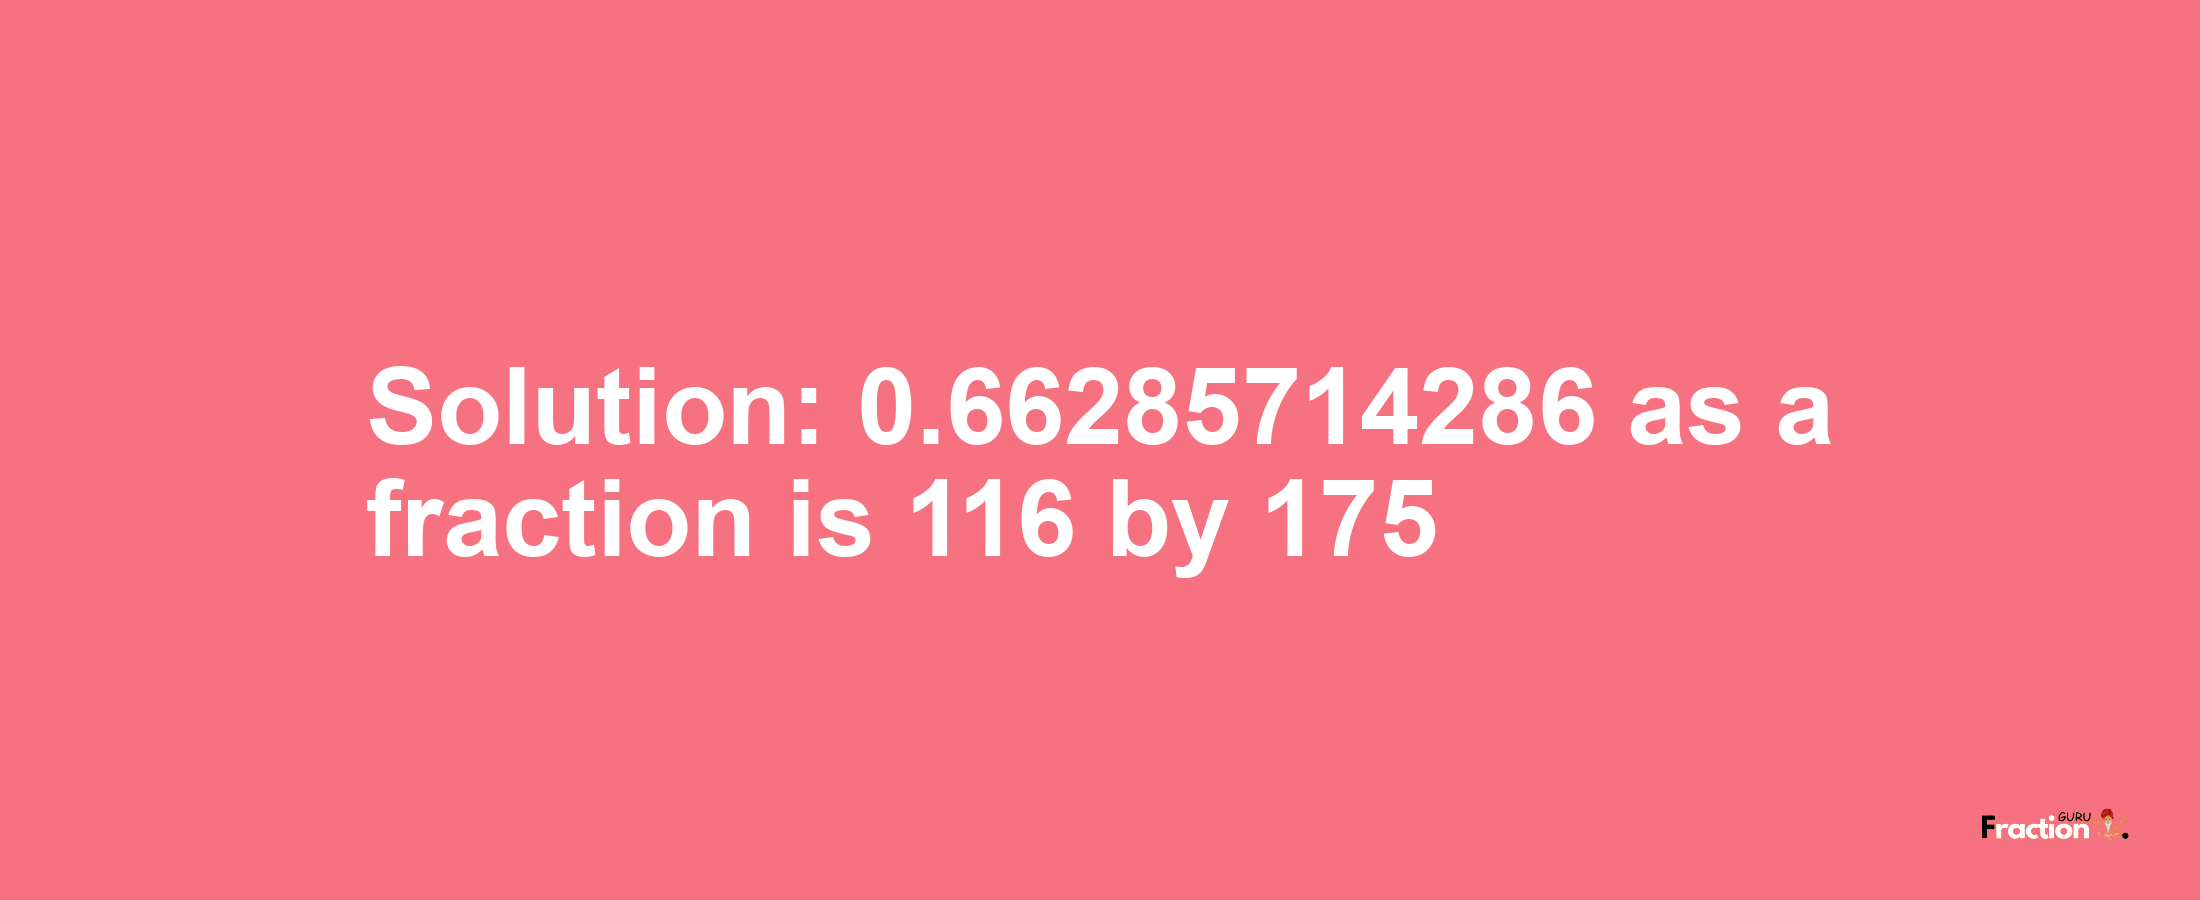 Solution:0.66285714286 as a fraction is 116/175